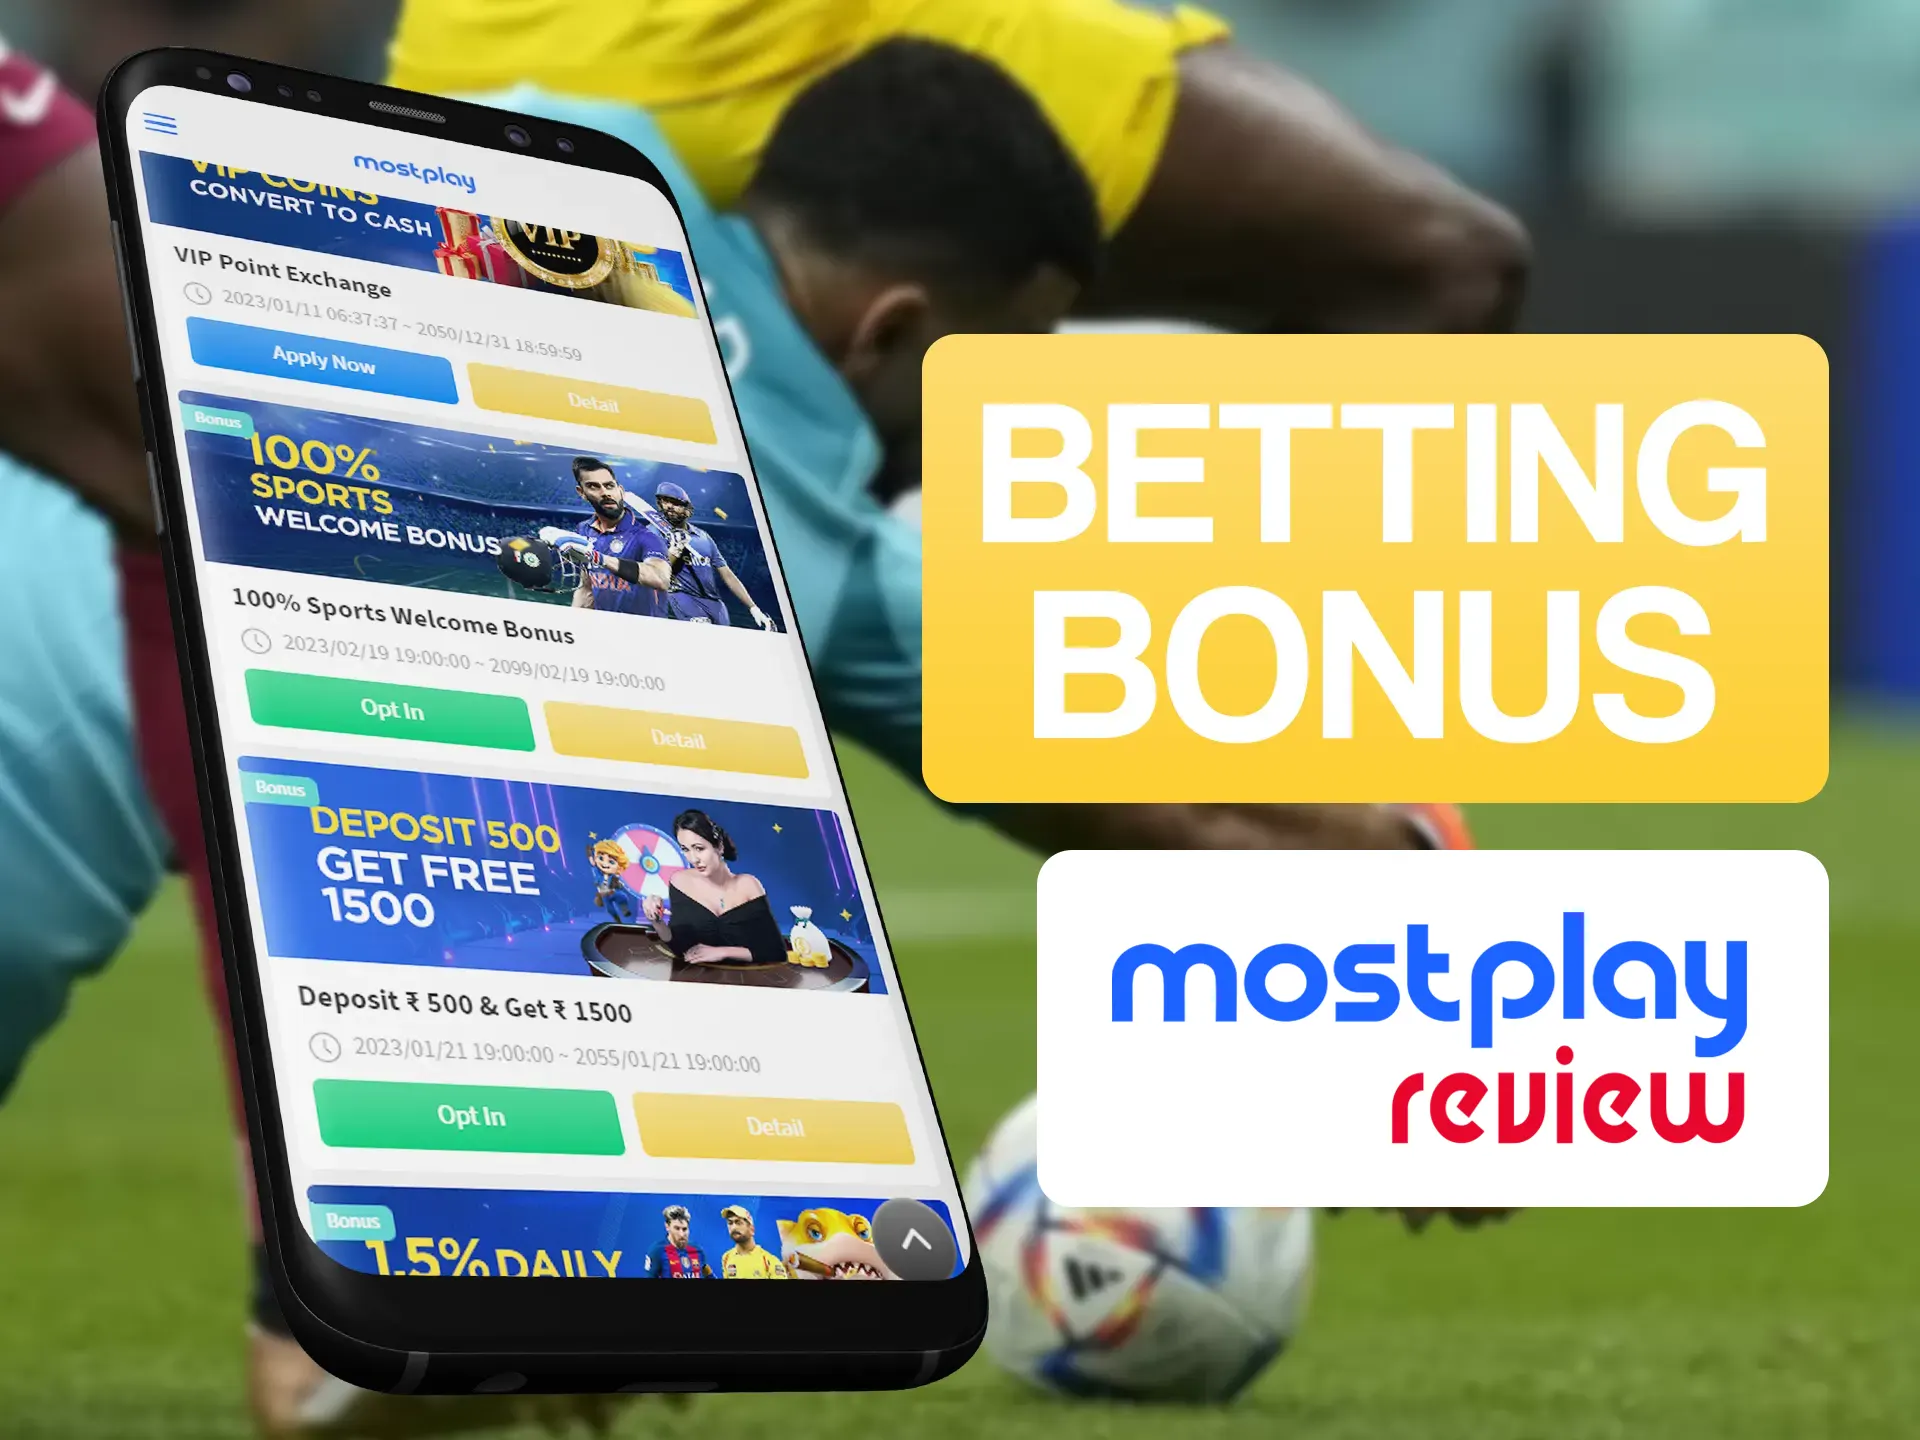 Double your money on a bet with the Mostplay betting bonus.